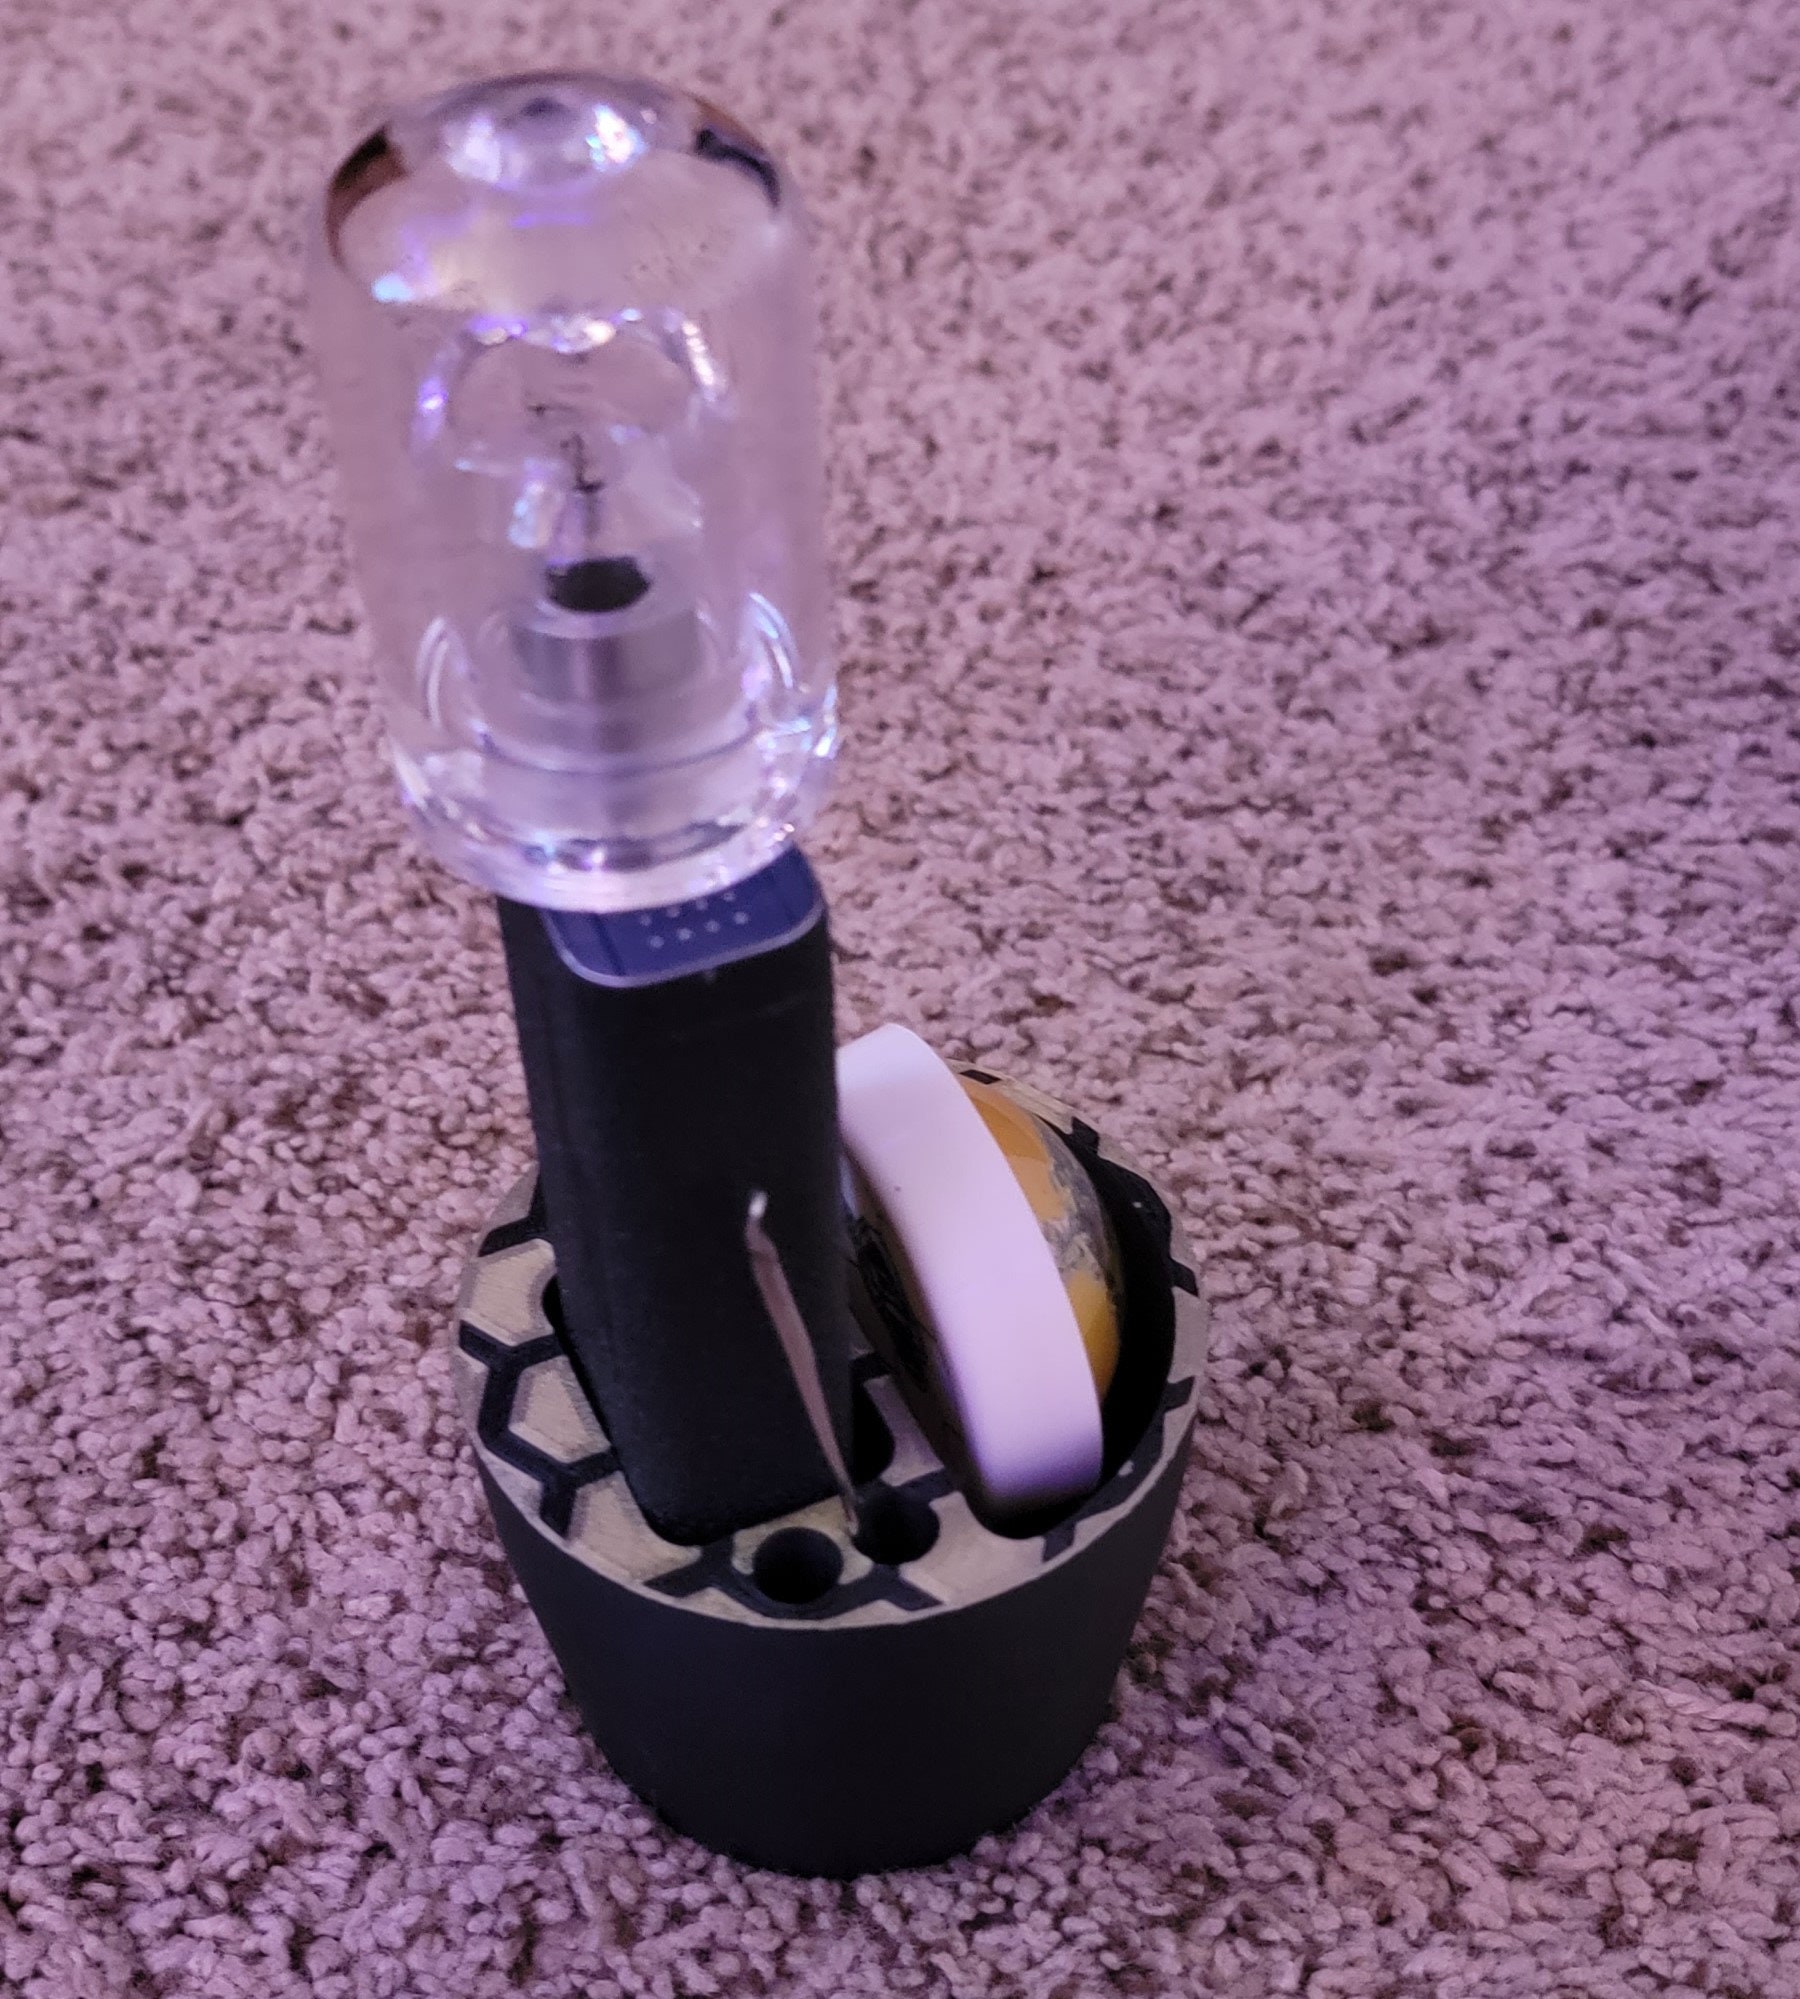 Hold-a-tool Dabber / Wax Tool Holder SMOK3DESIGNS 3D Printed Dabbing  Accessories 